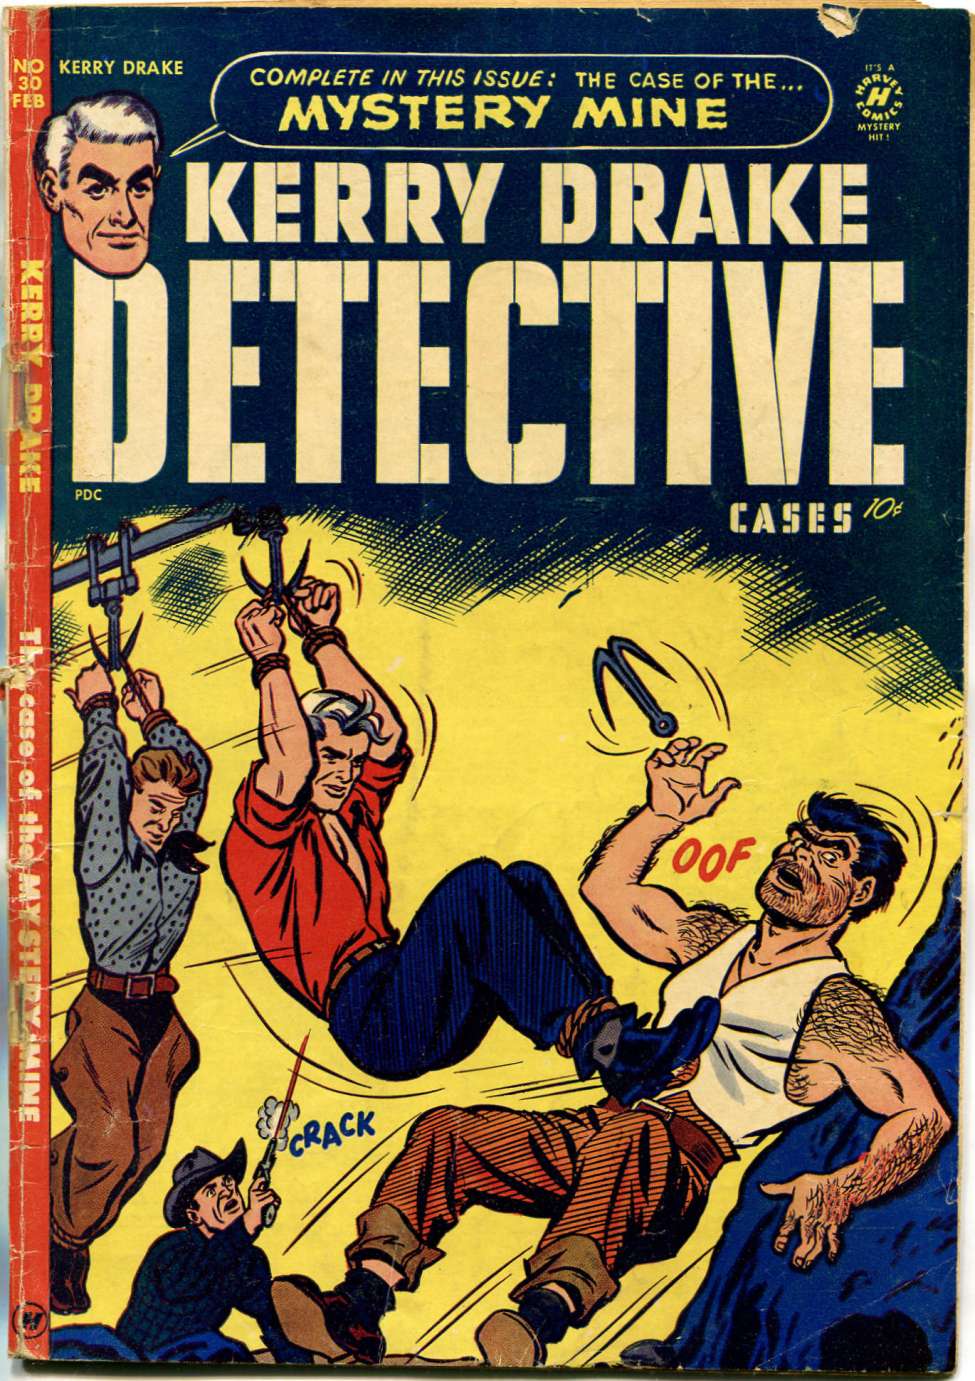 Book Cover For Kerry Drake Detective Cases 30 - Version 2